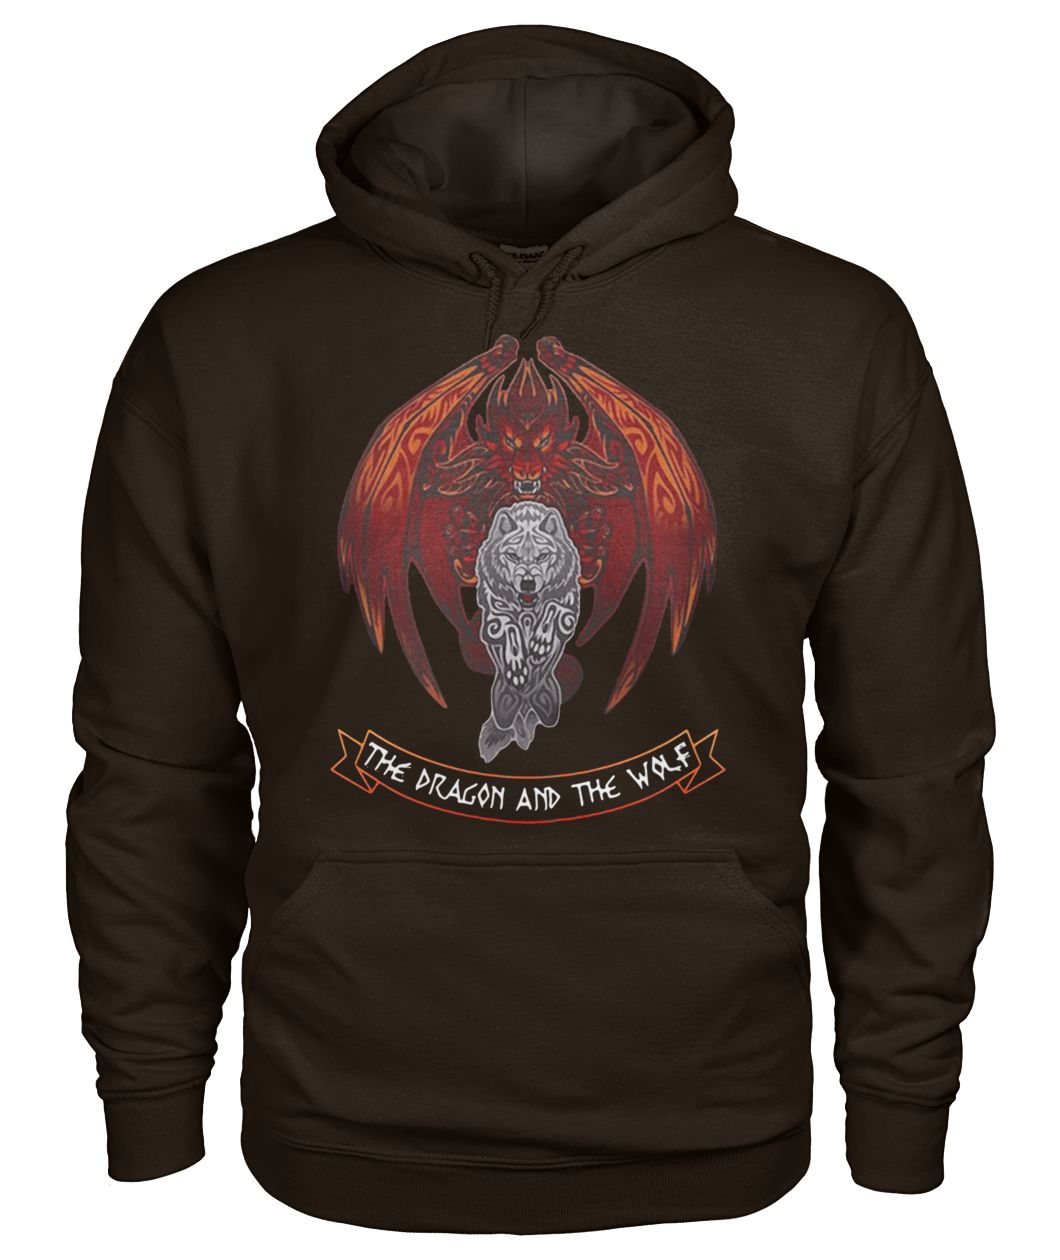 Game of thrones the dragon and the wolf gildan hoodie